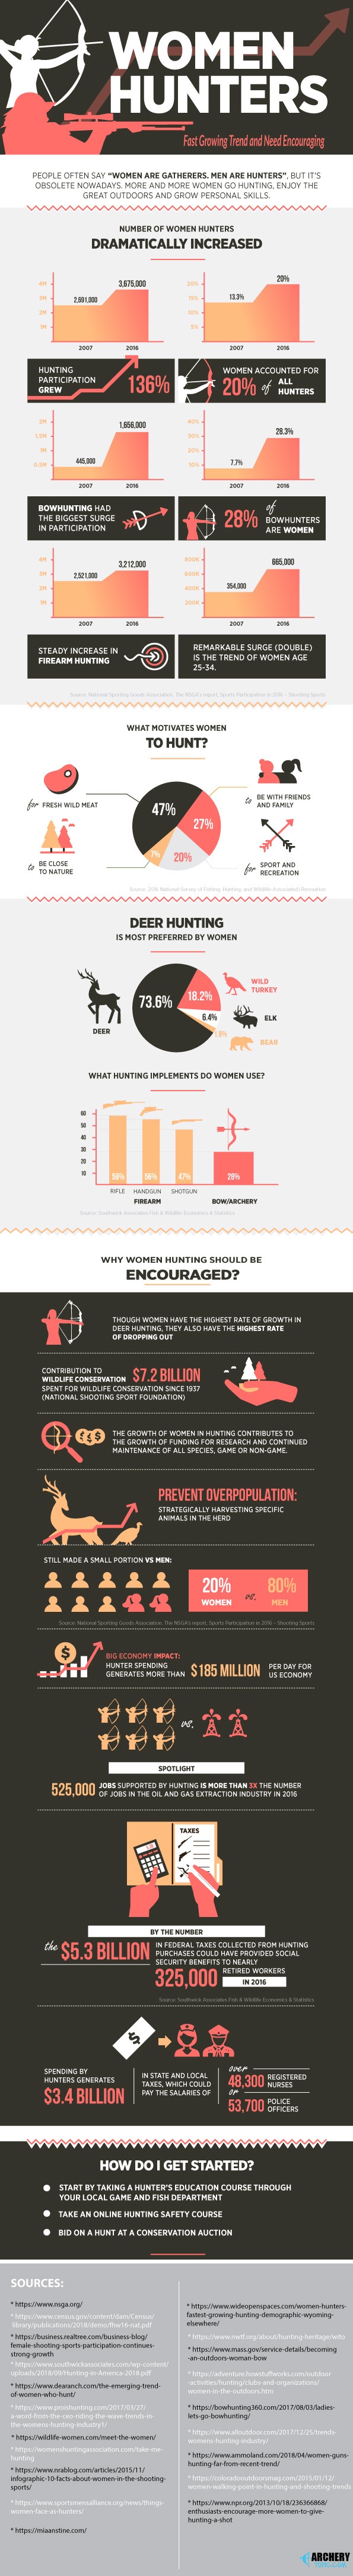 women hunting infographic - the fast growing trend and need encourage